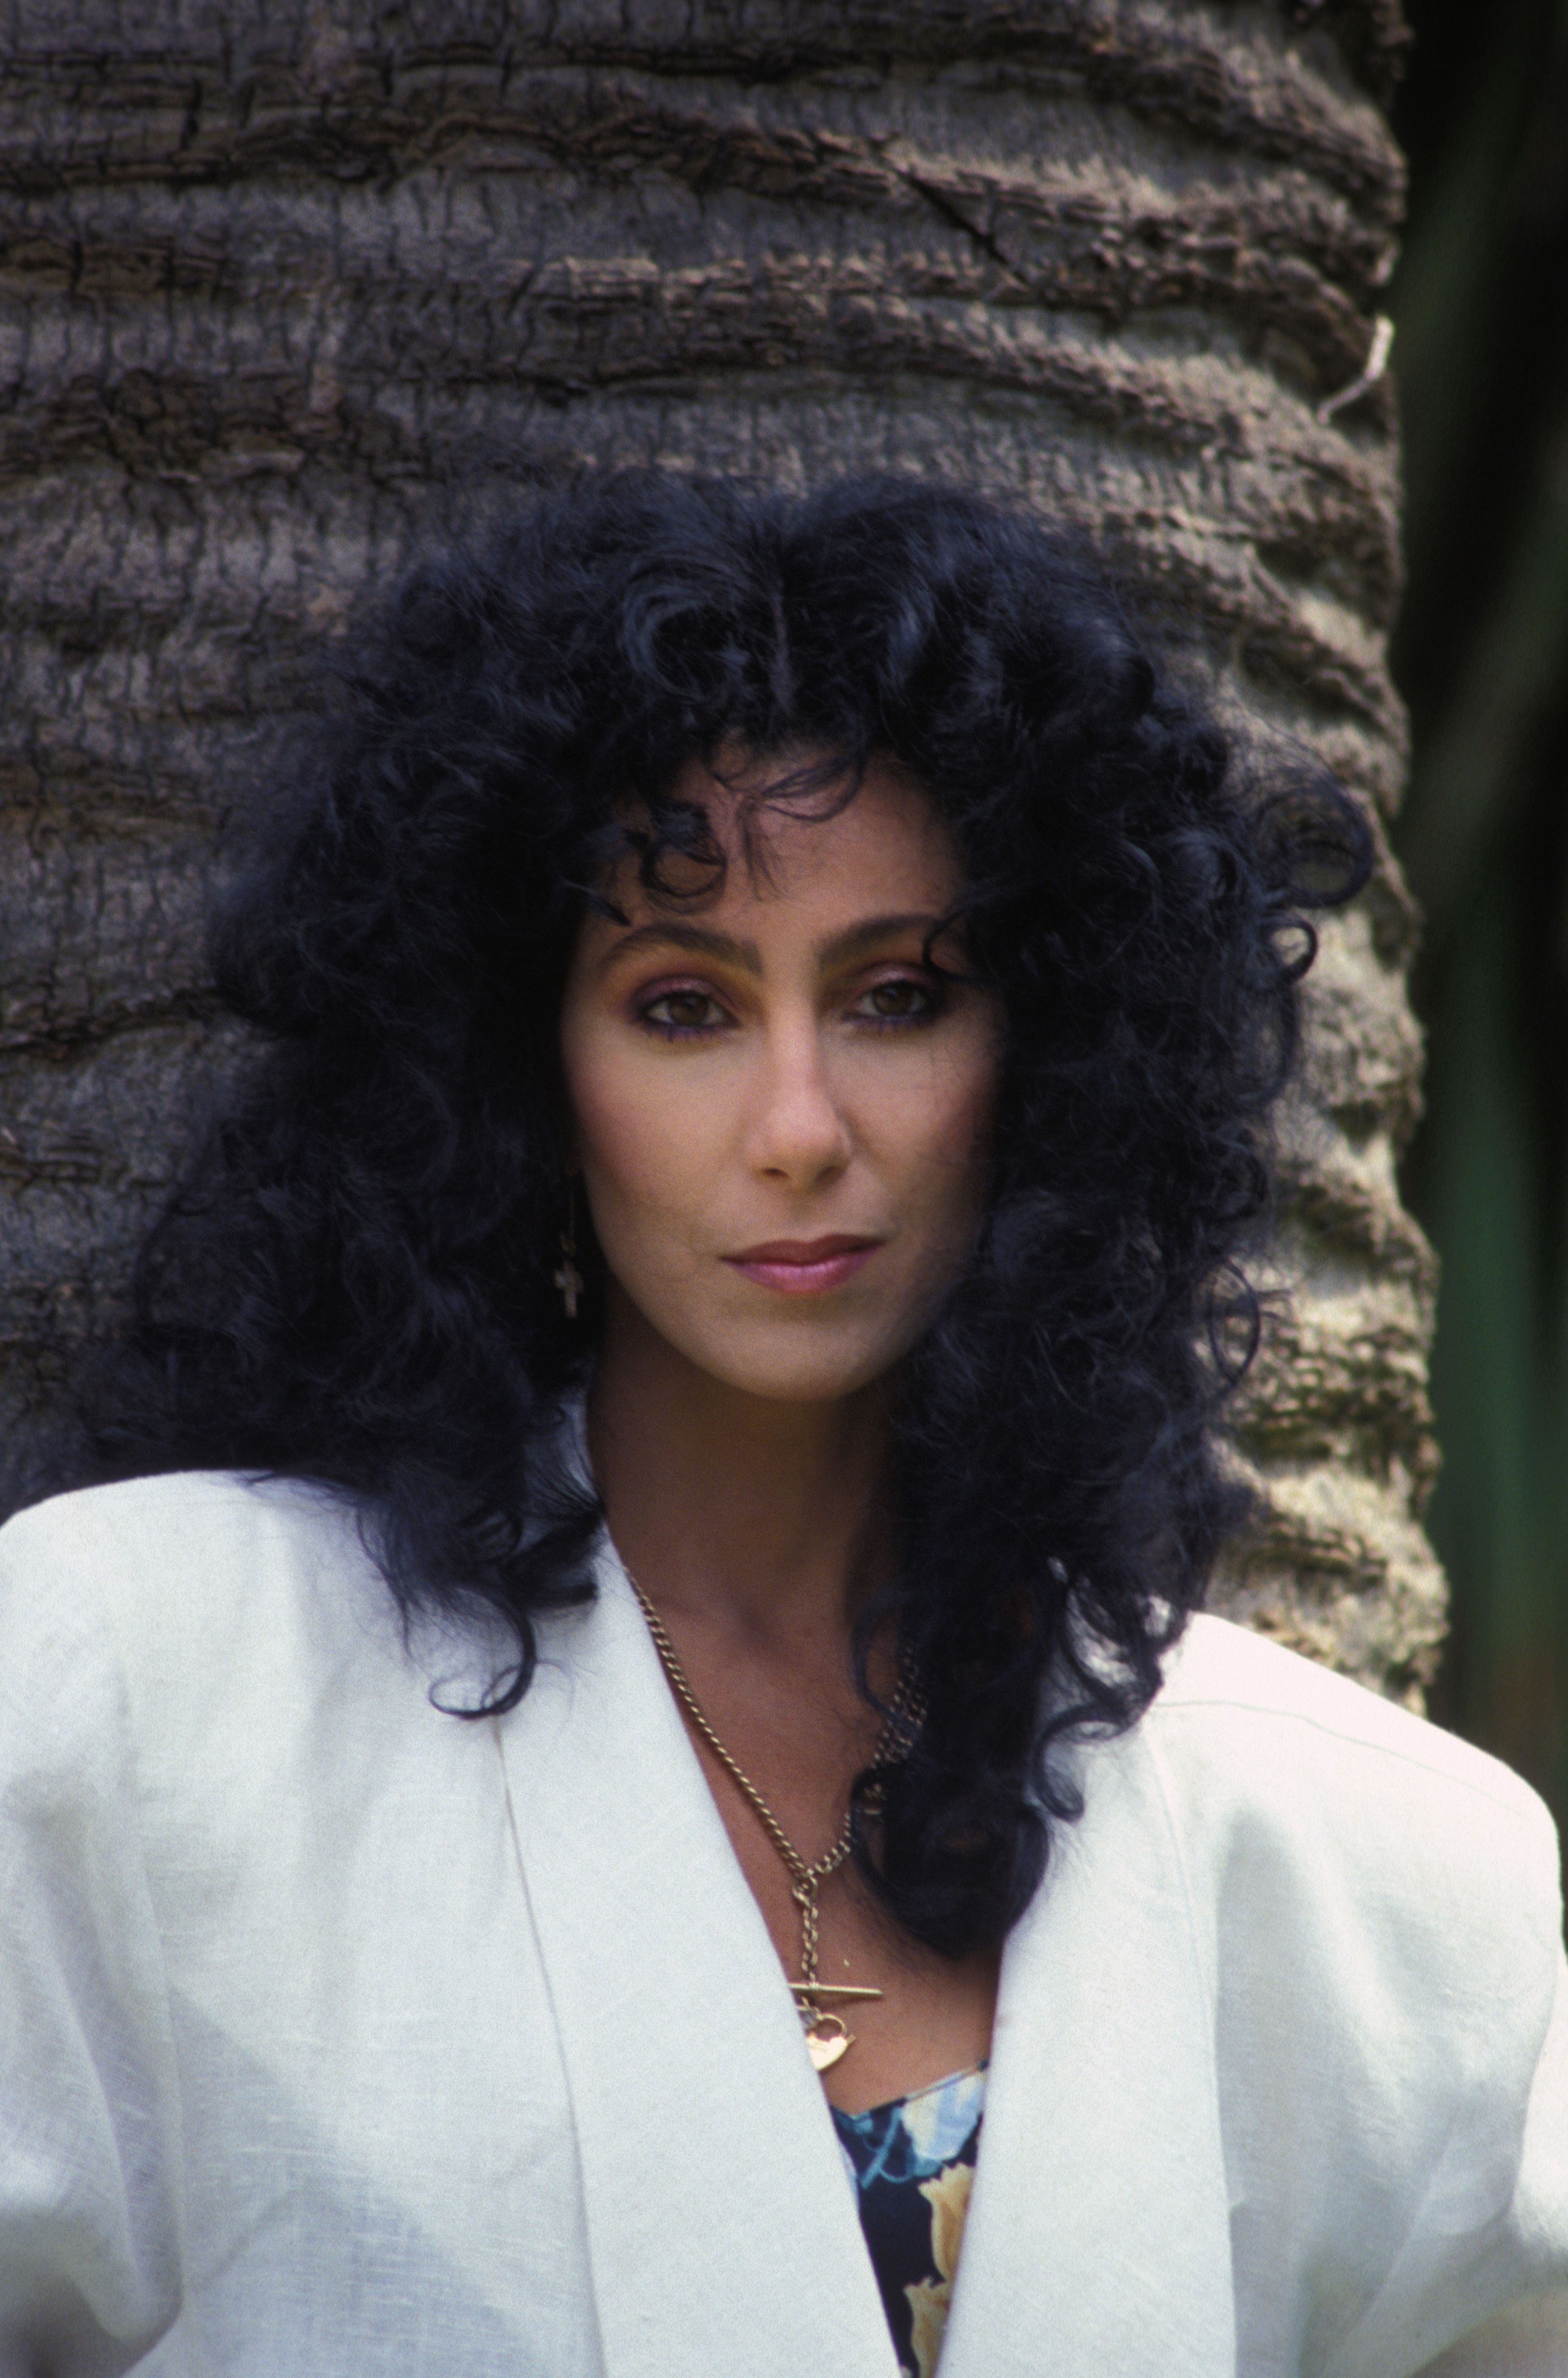 Cher during the Cannes Film Festival on May 15, 1985 in France | Source: Getty Images